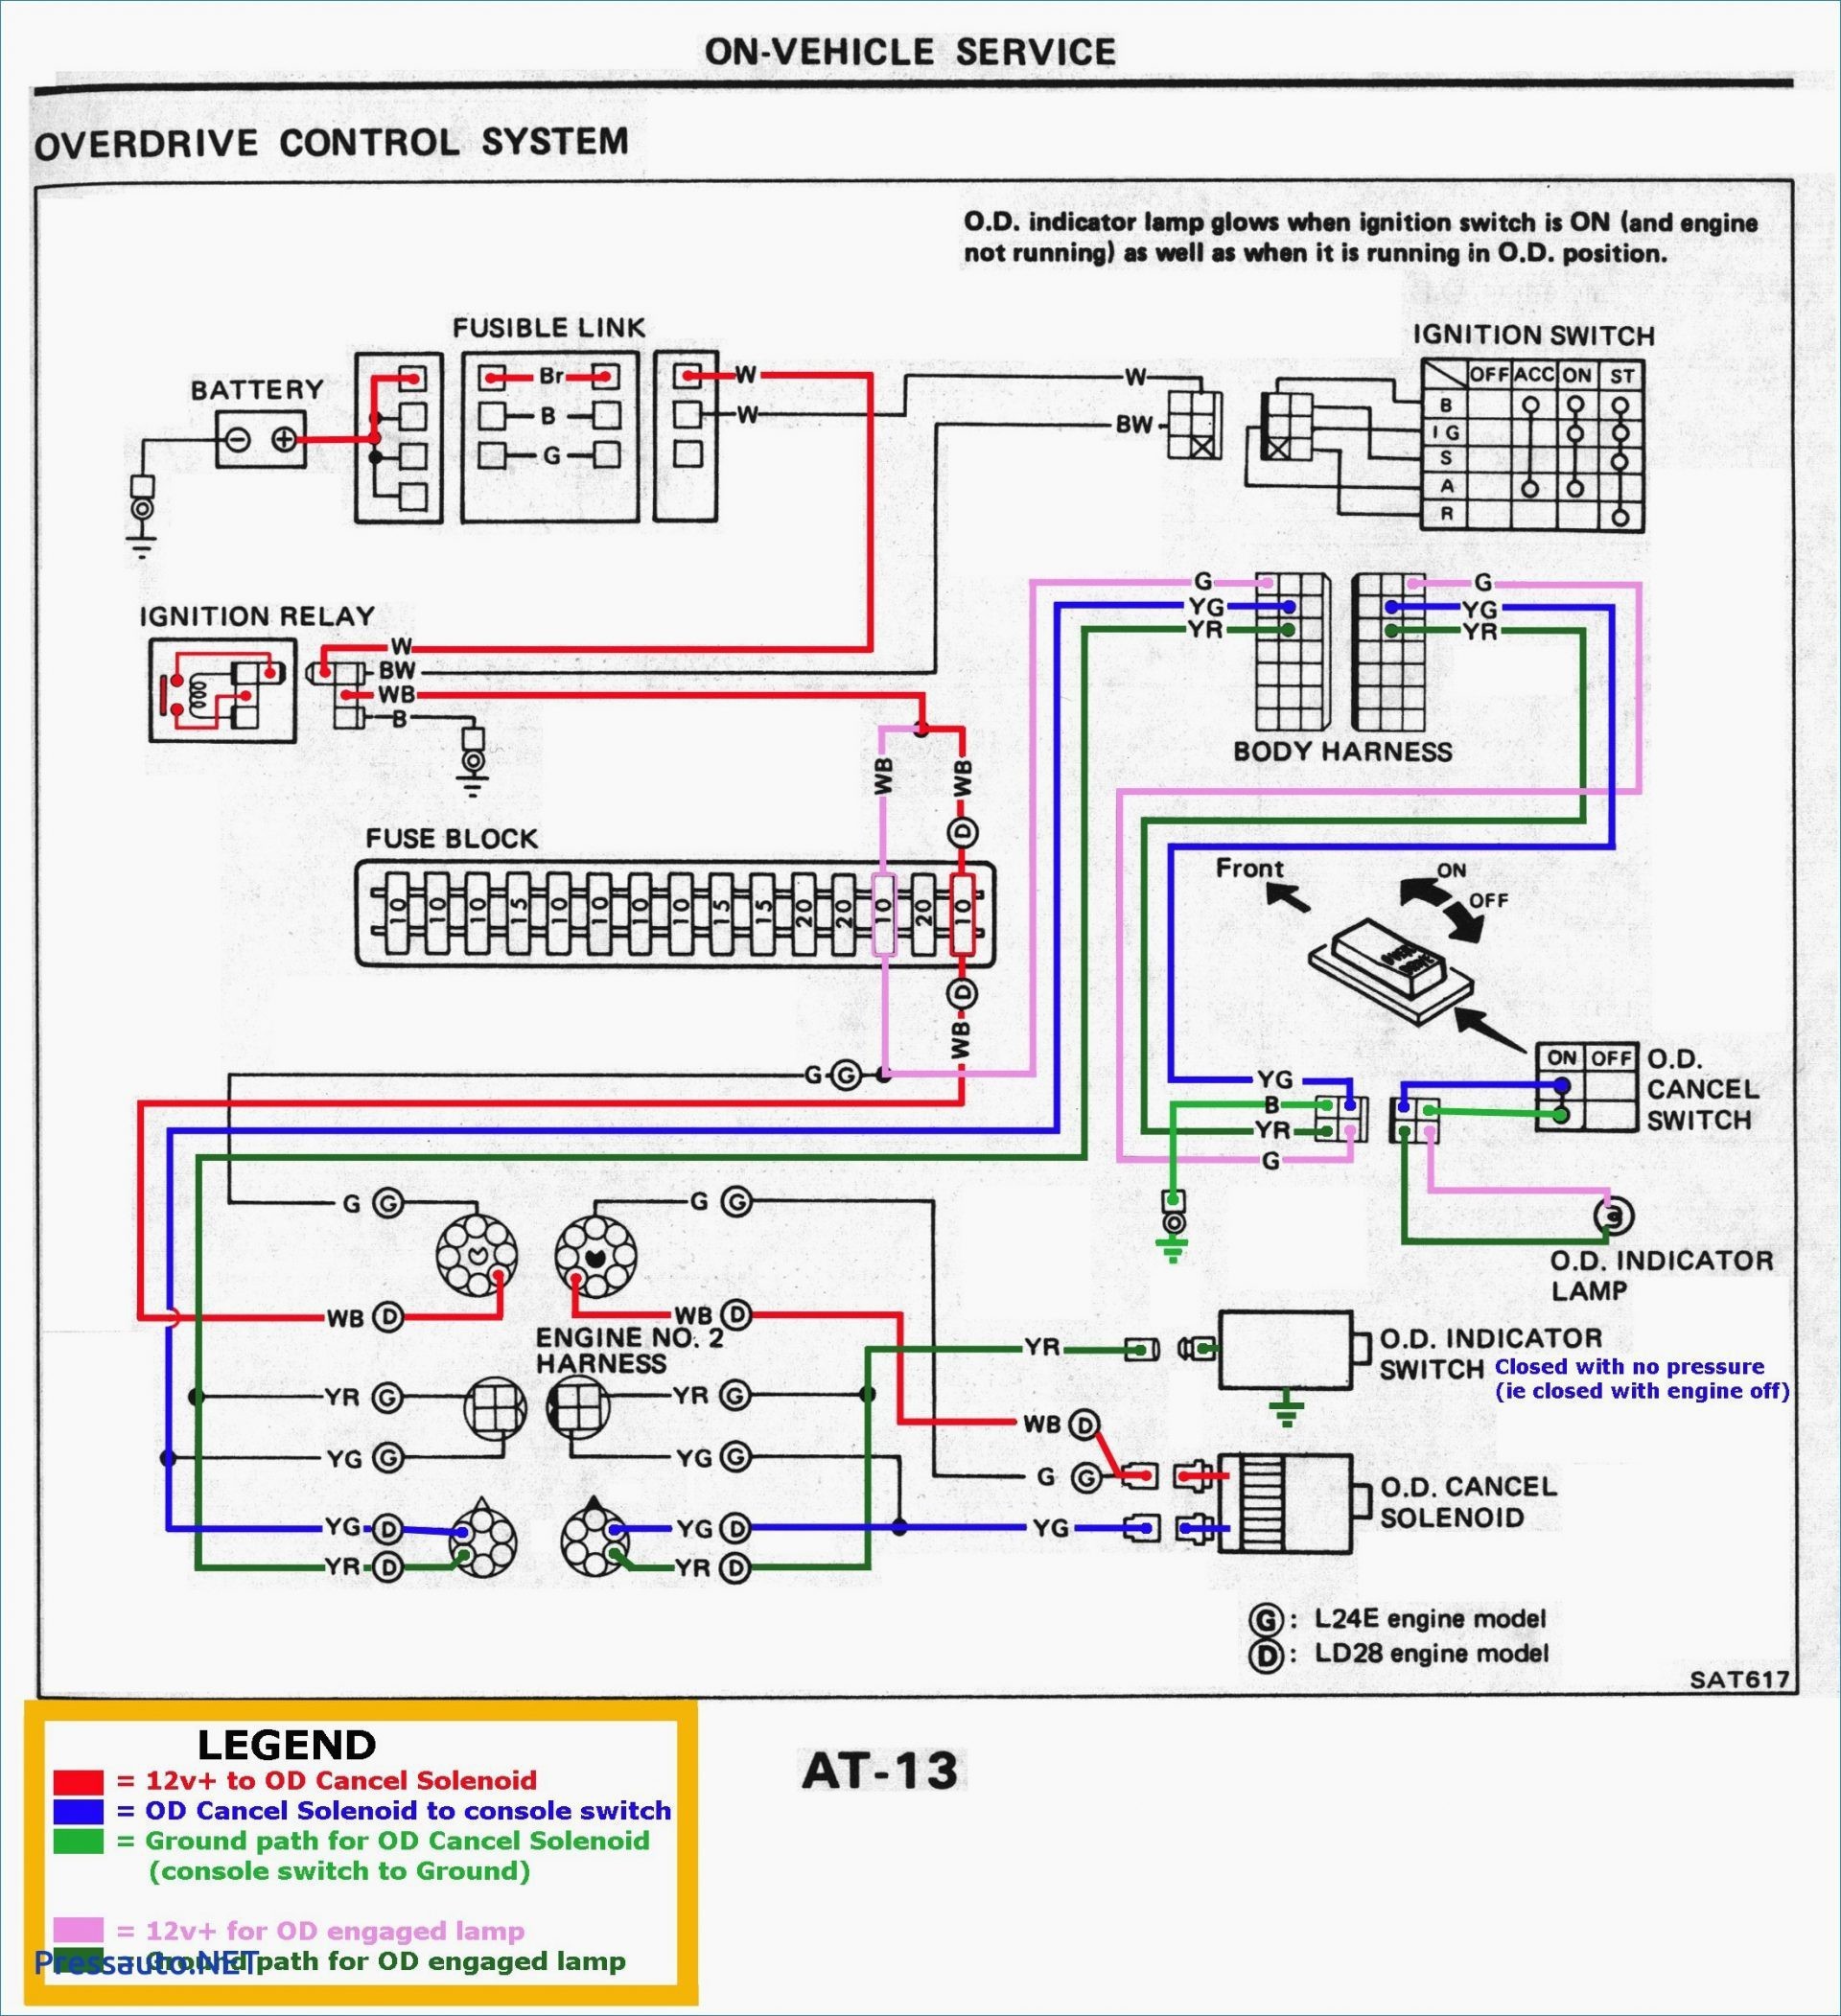 wiring diagram for 2 lights and 1 switch simple 2019 wiring diagram rh joescablecar wiring a lamp with night light wiring a switch with night light